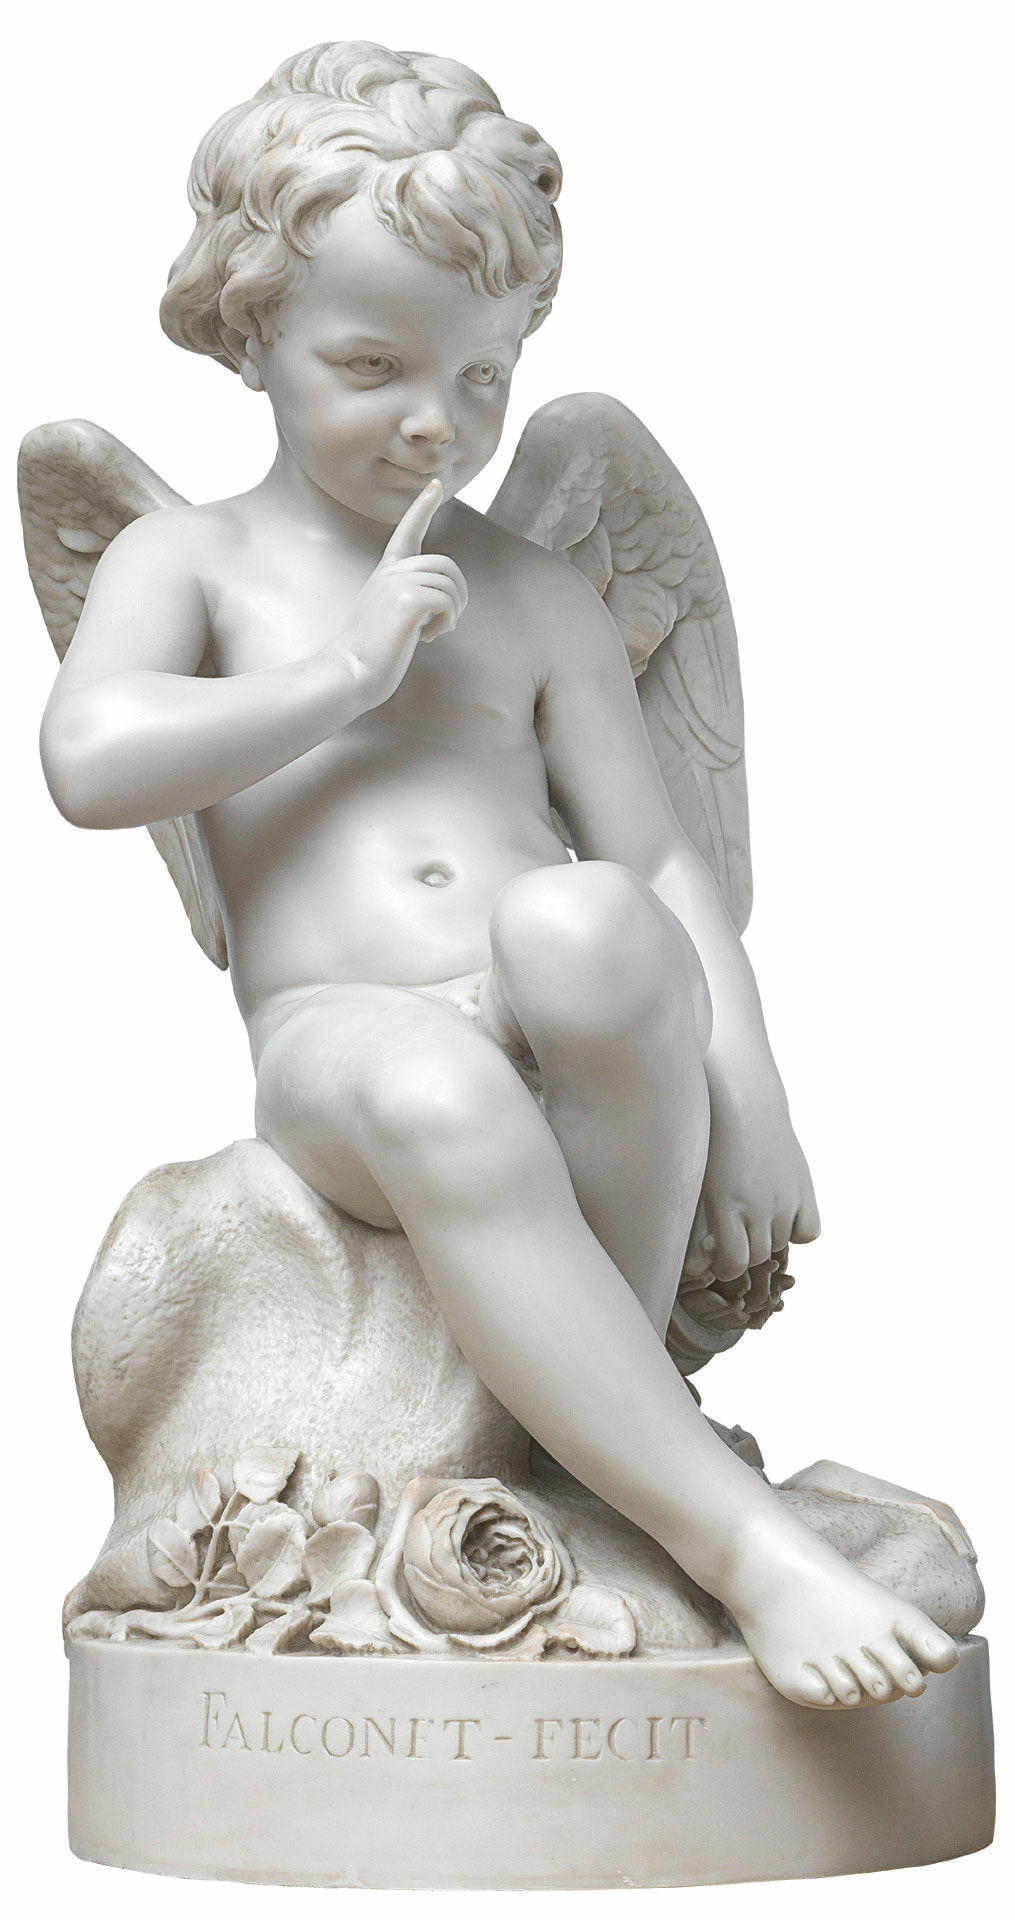 "The Menacing Cupid", 1757 (large sculpture) by Etienne-Maurice Falconet